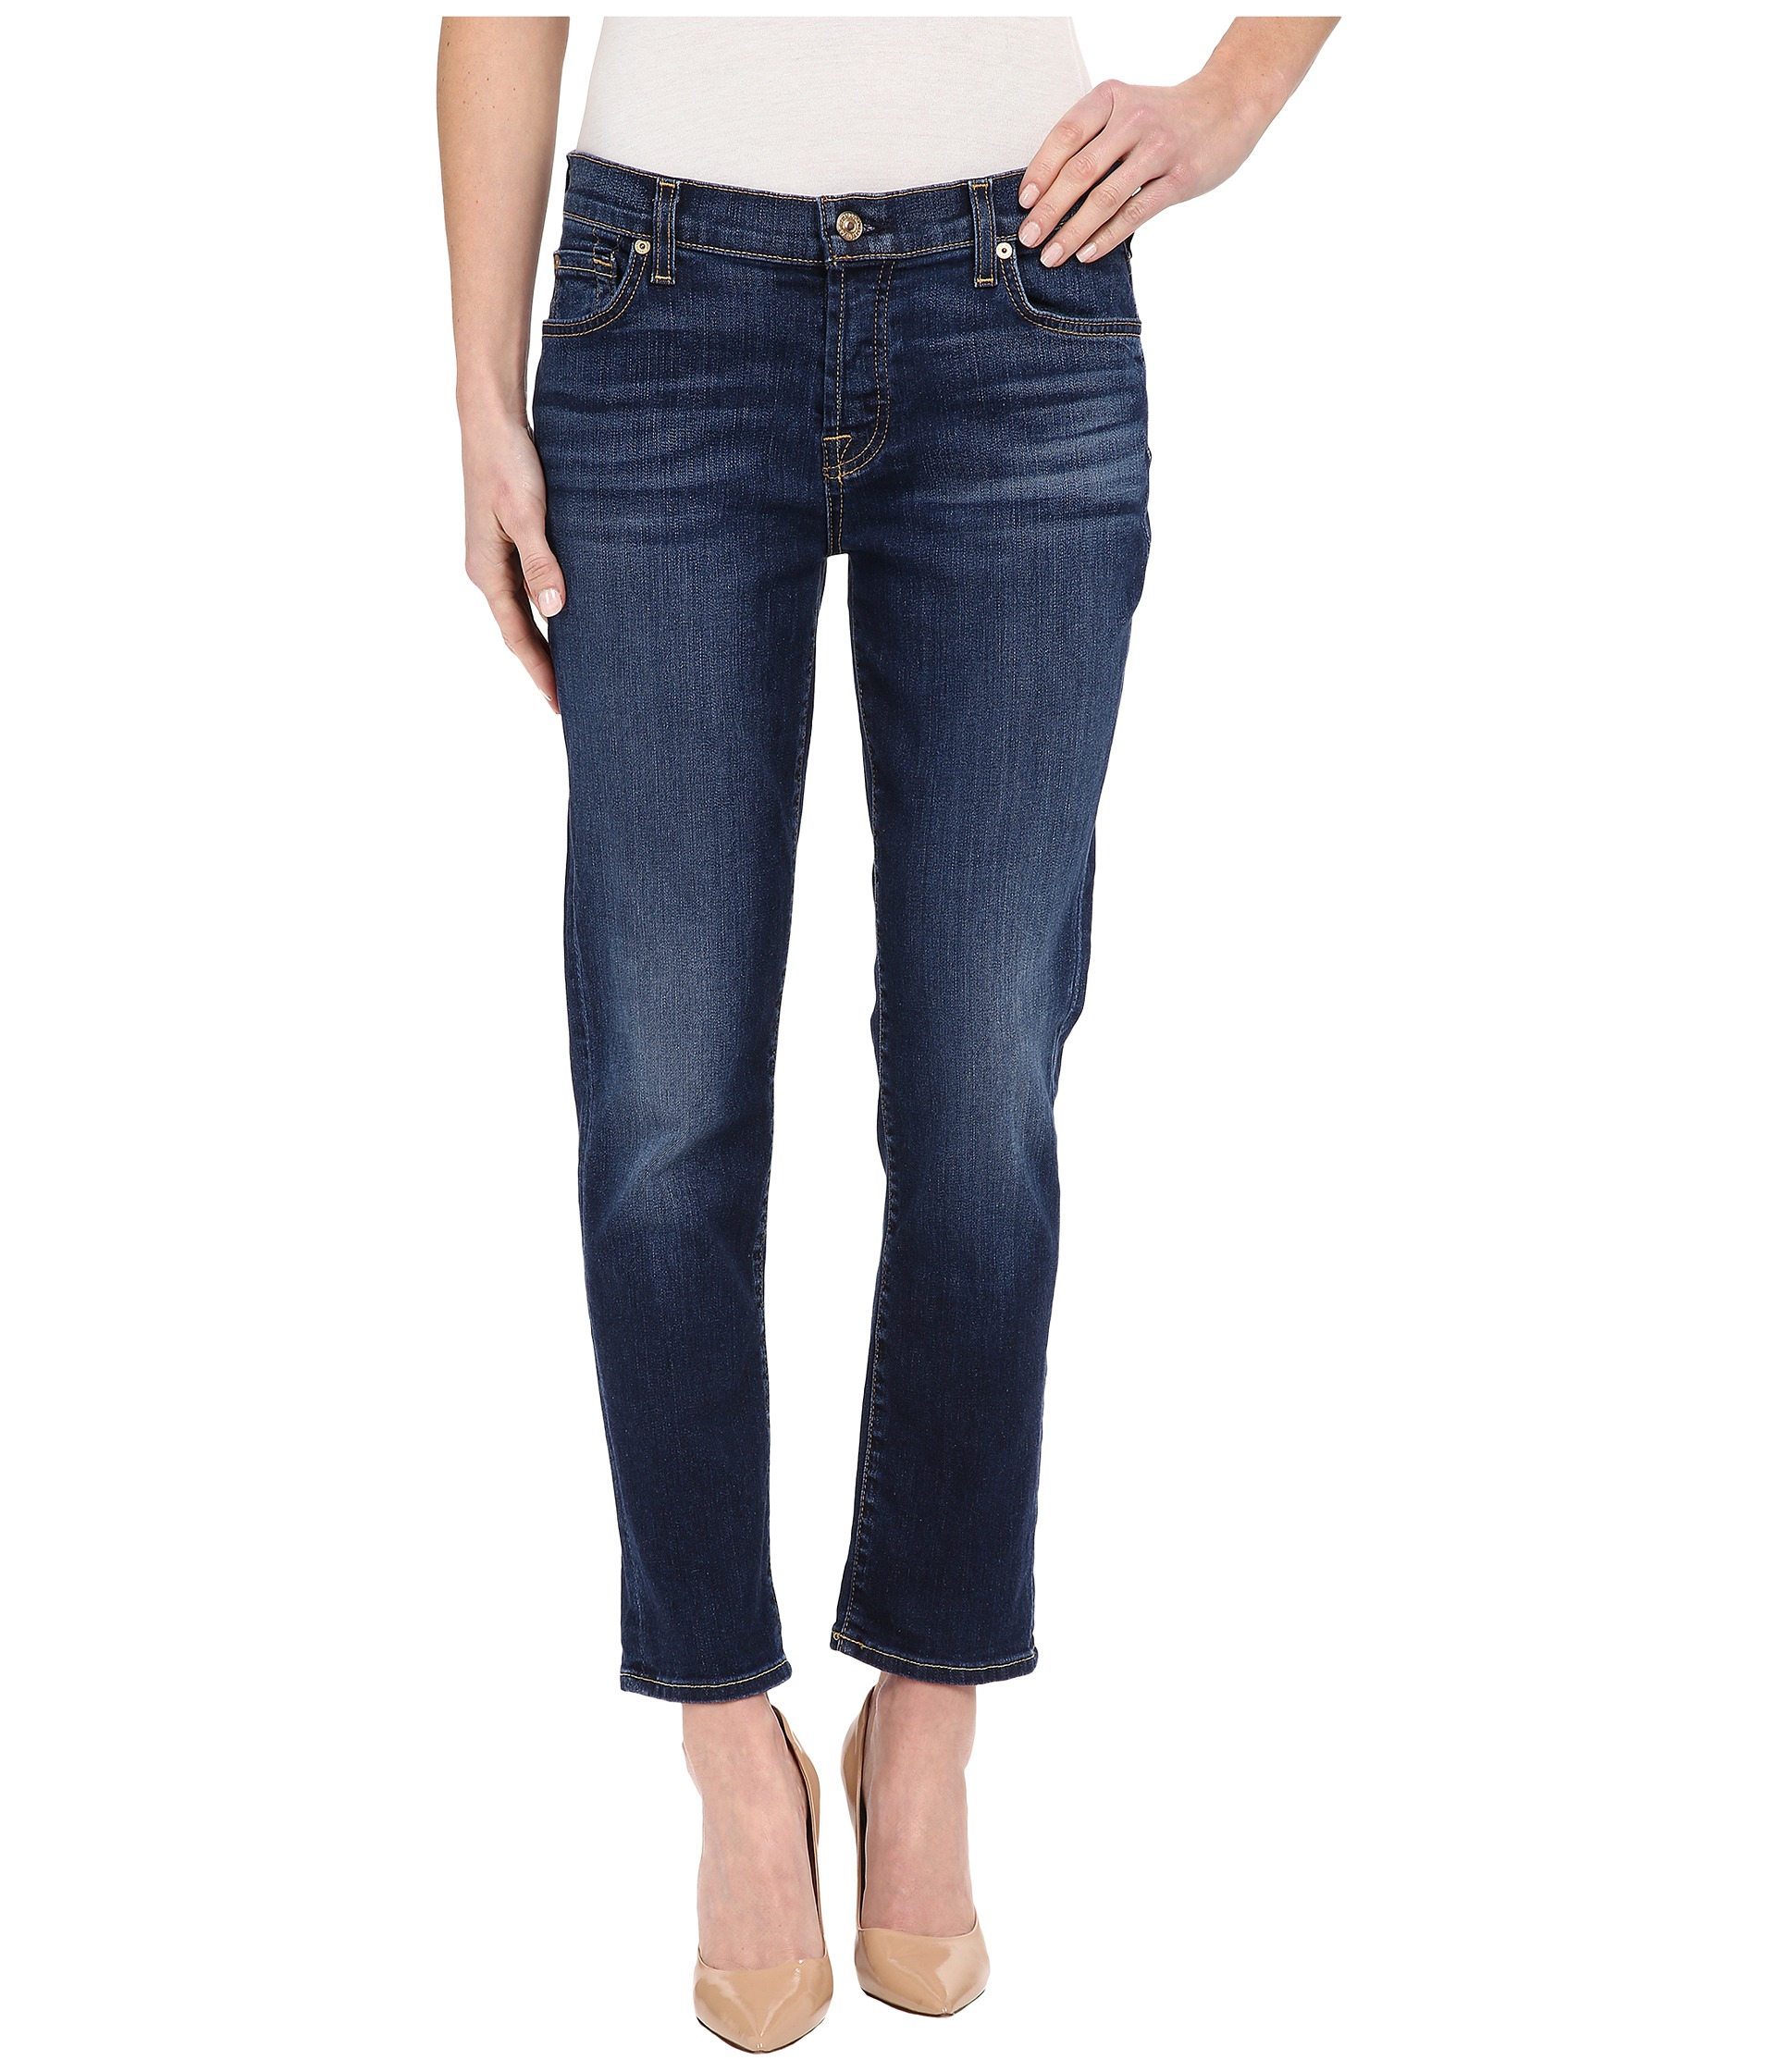 7 For All Mankind Josefina in Medium Timeless Blue at Zappos.com